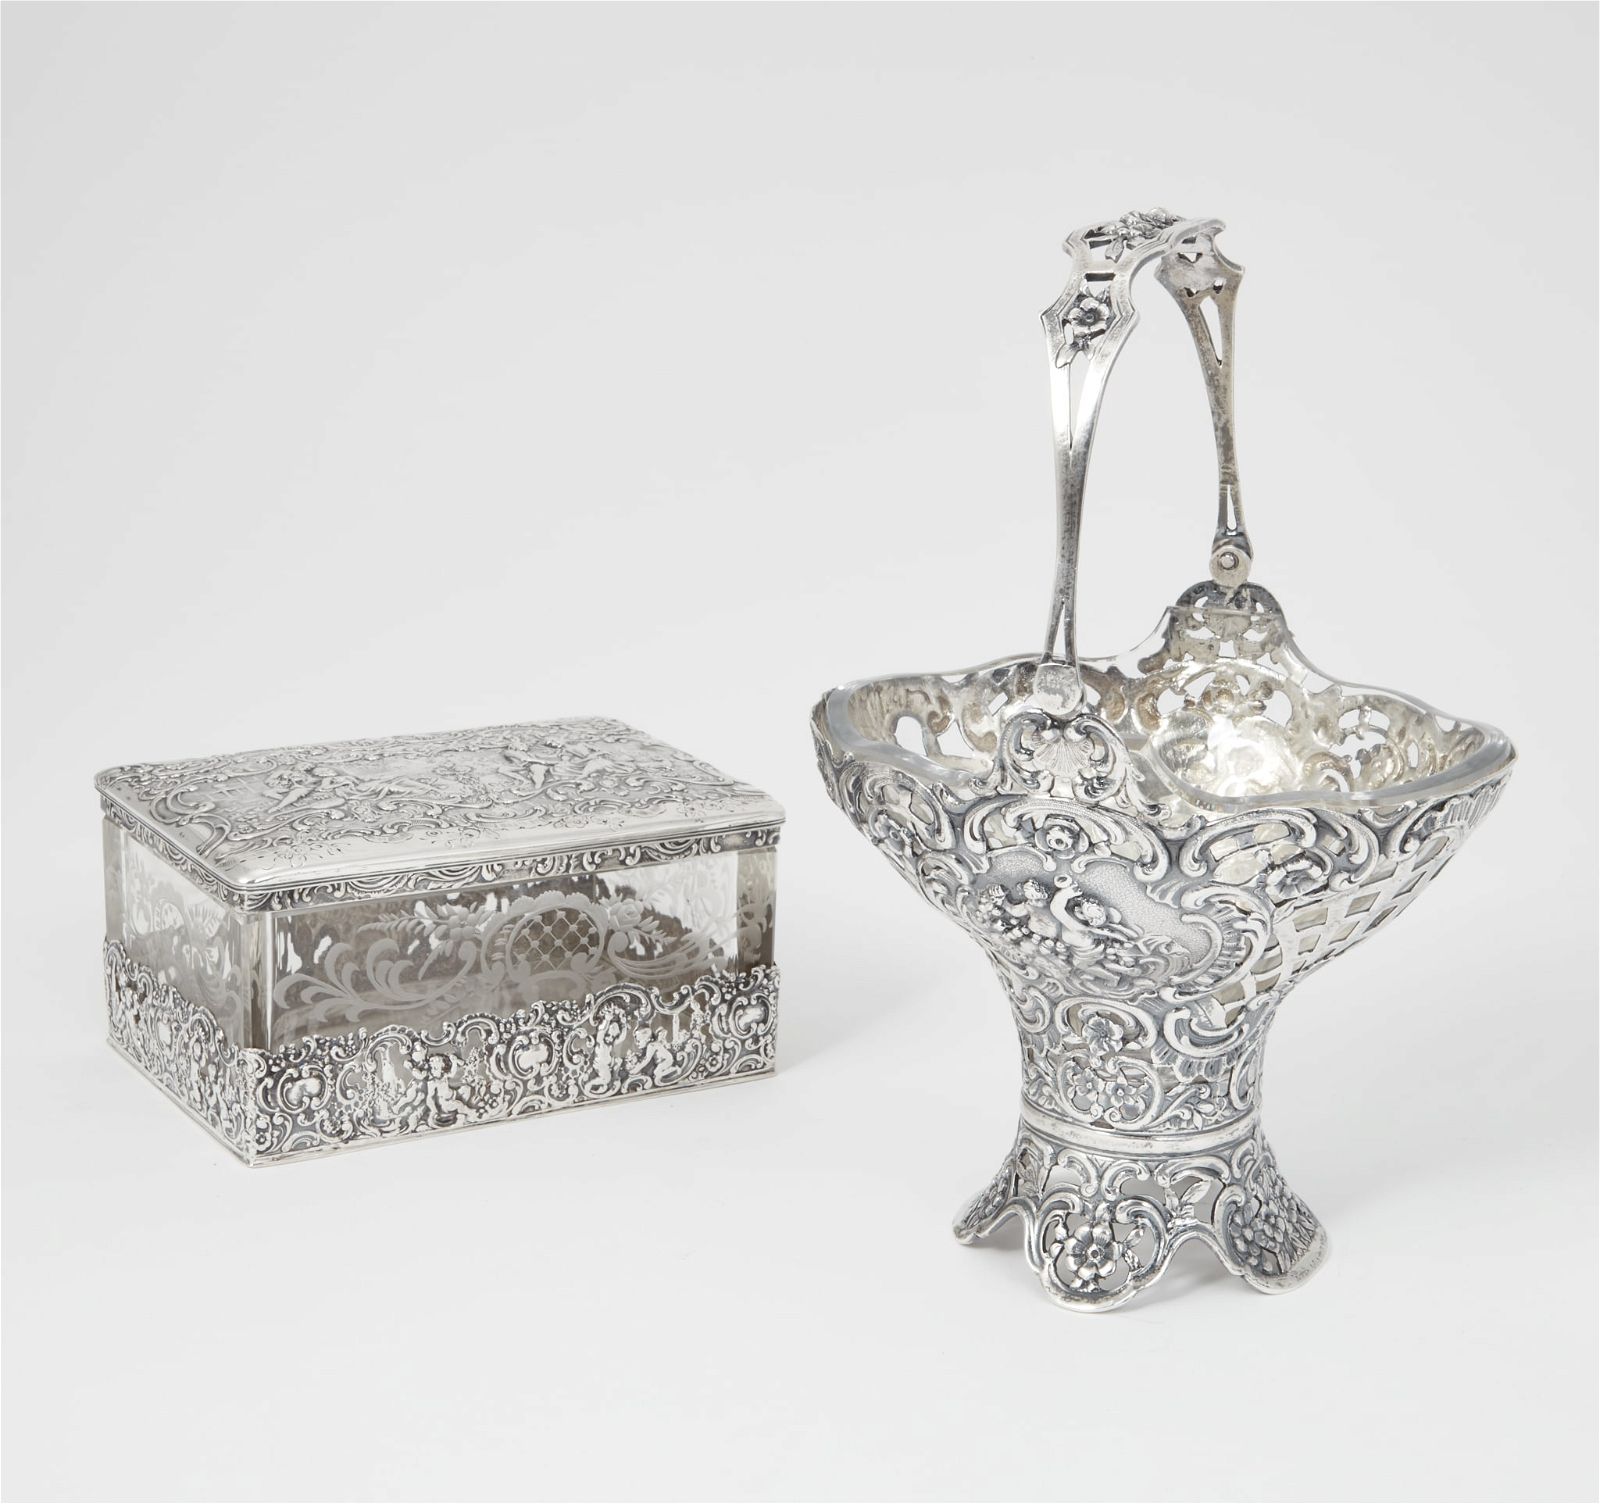 TWO GERMAN SILVER AND GLASS TABLEWARESTwo